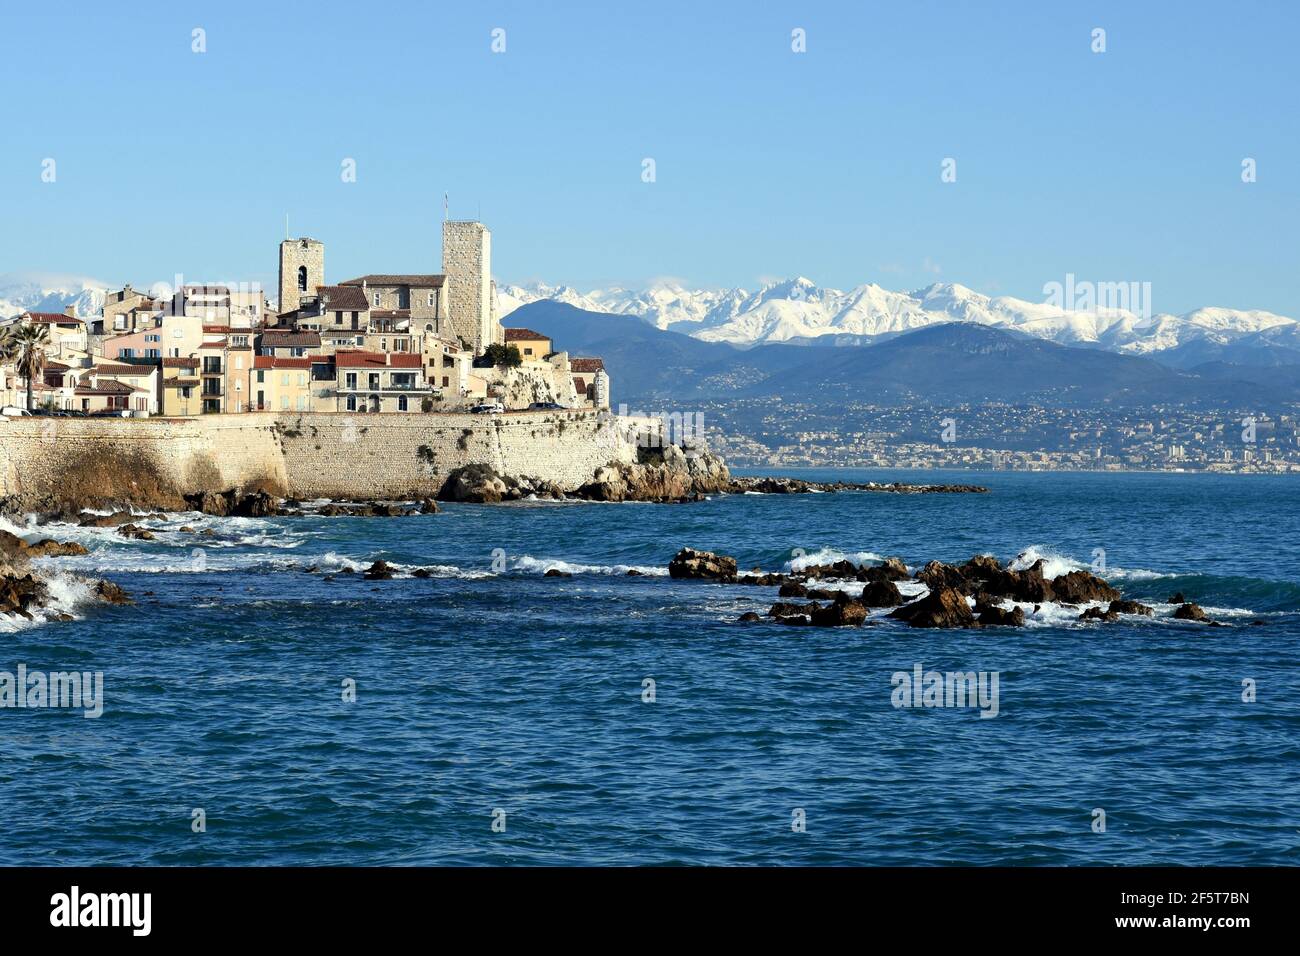 France, french riviera, The old town of Antibes with its ramparts and the snowy Mercantour massive. Stock Photo